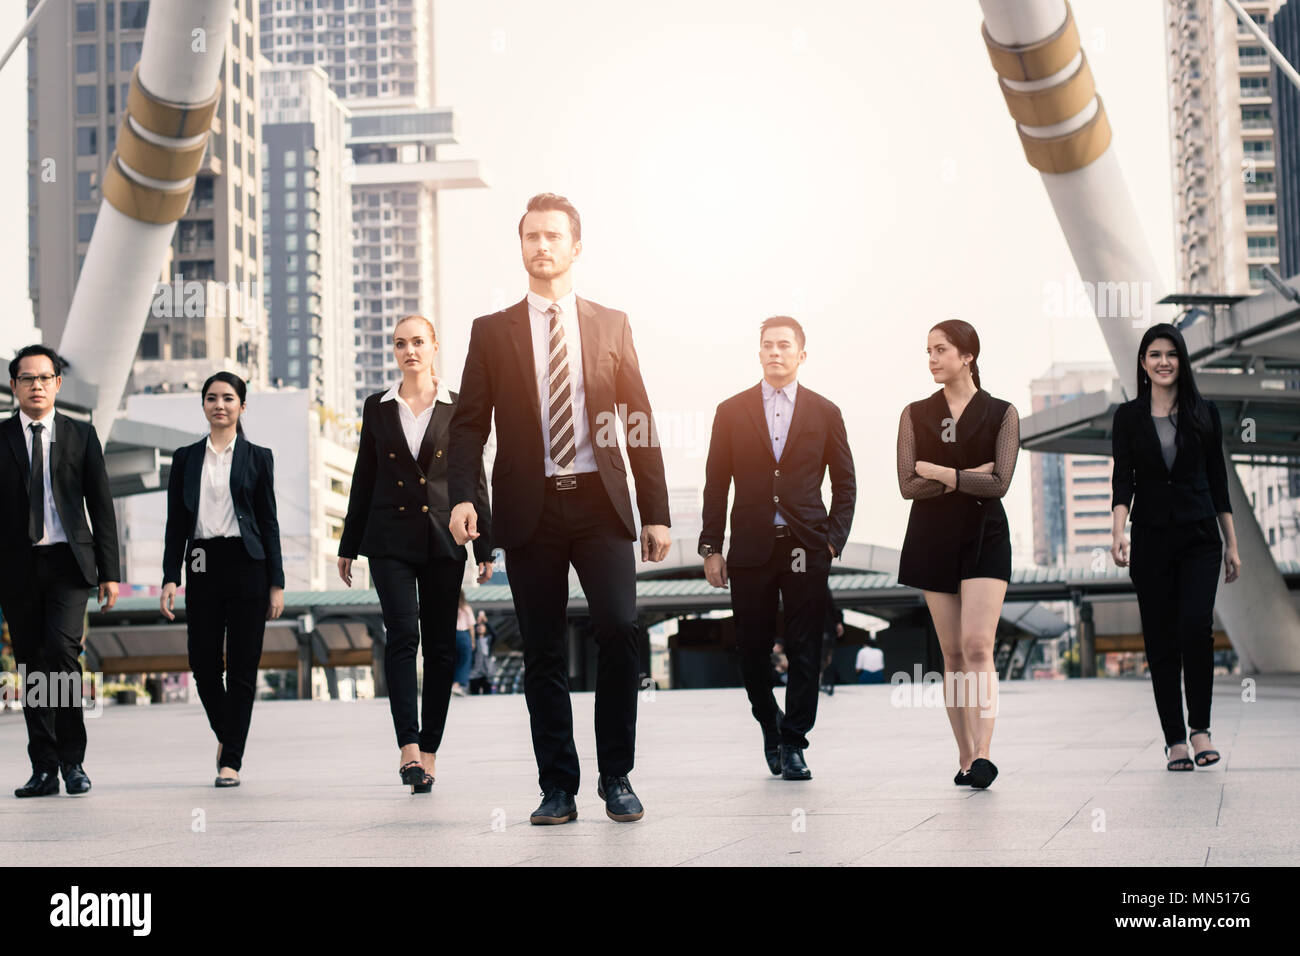 Teamwork and professional partnership concept, businesspeople team of multi ethnic walking with confidence in full suit Stock Photo